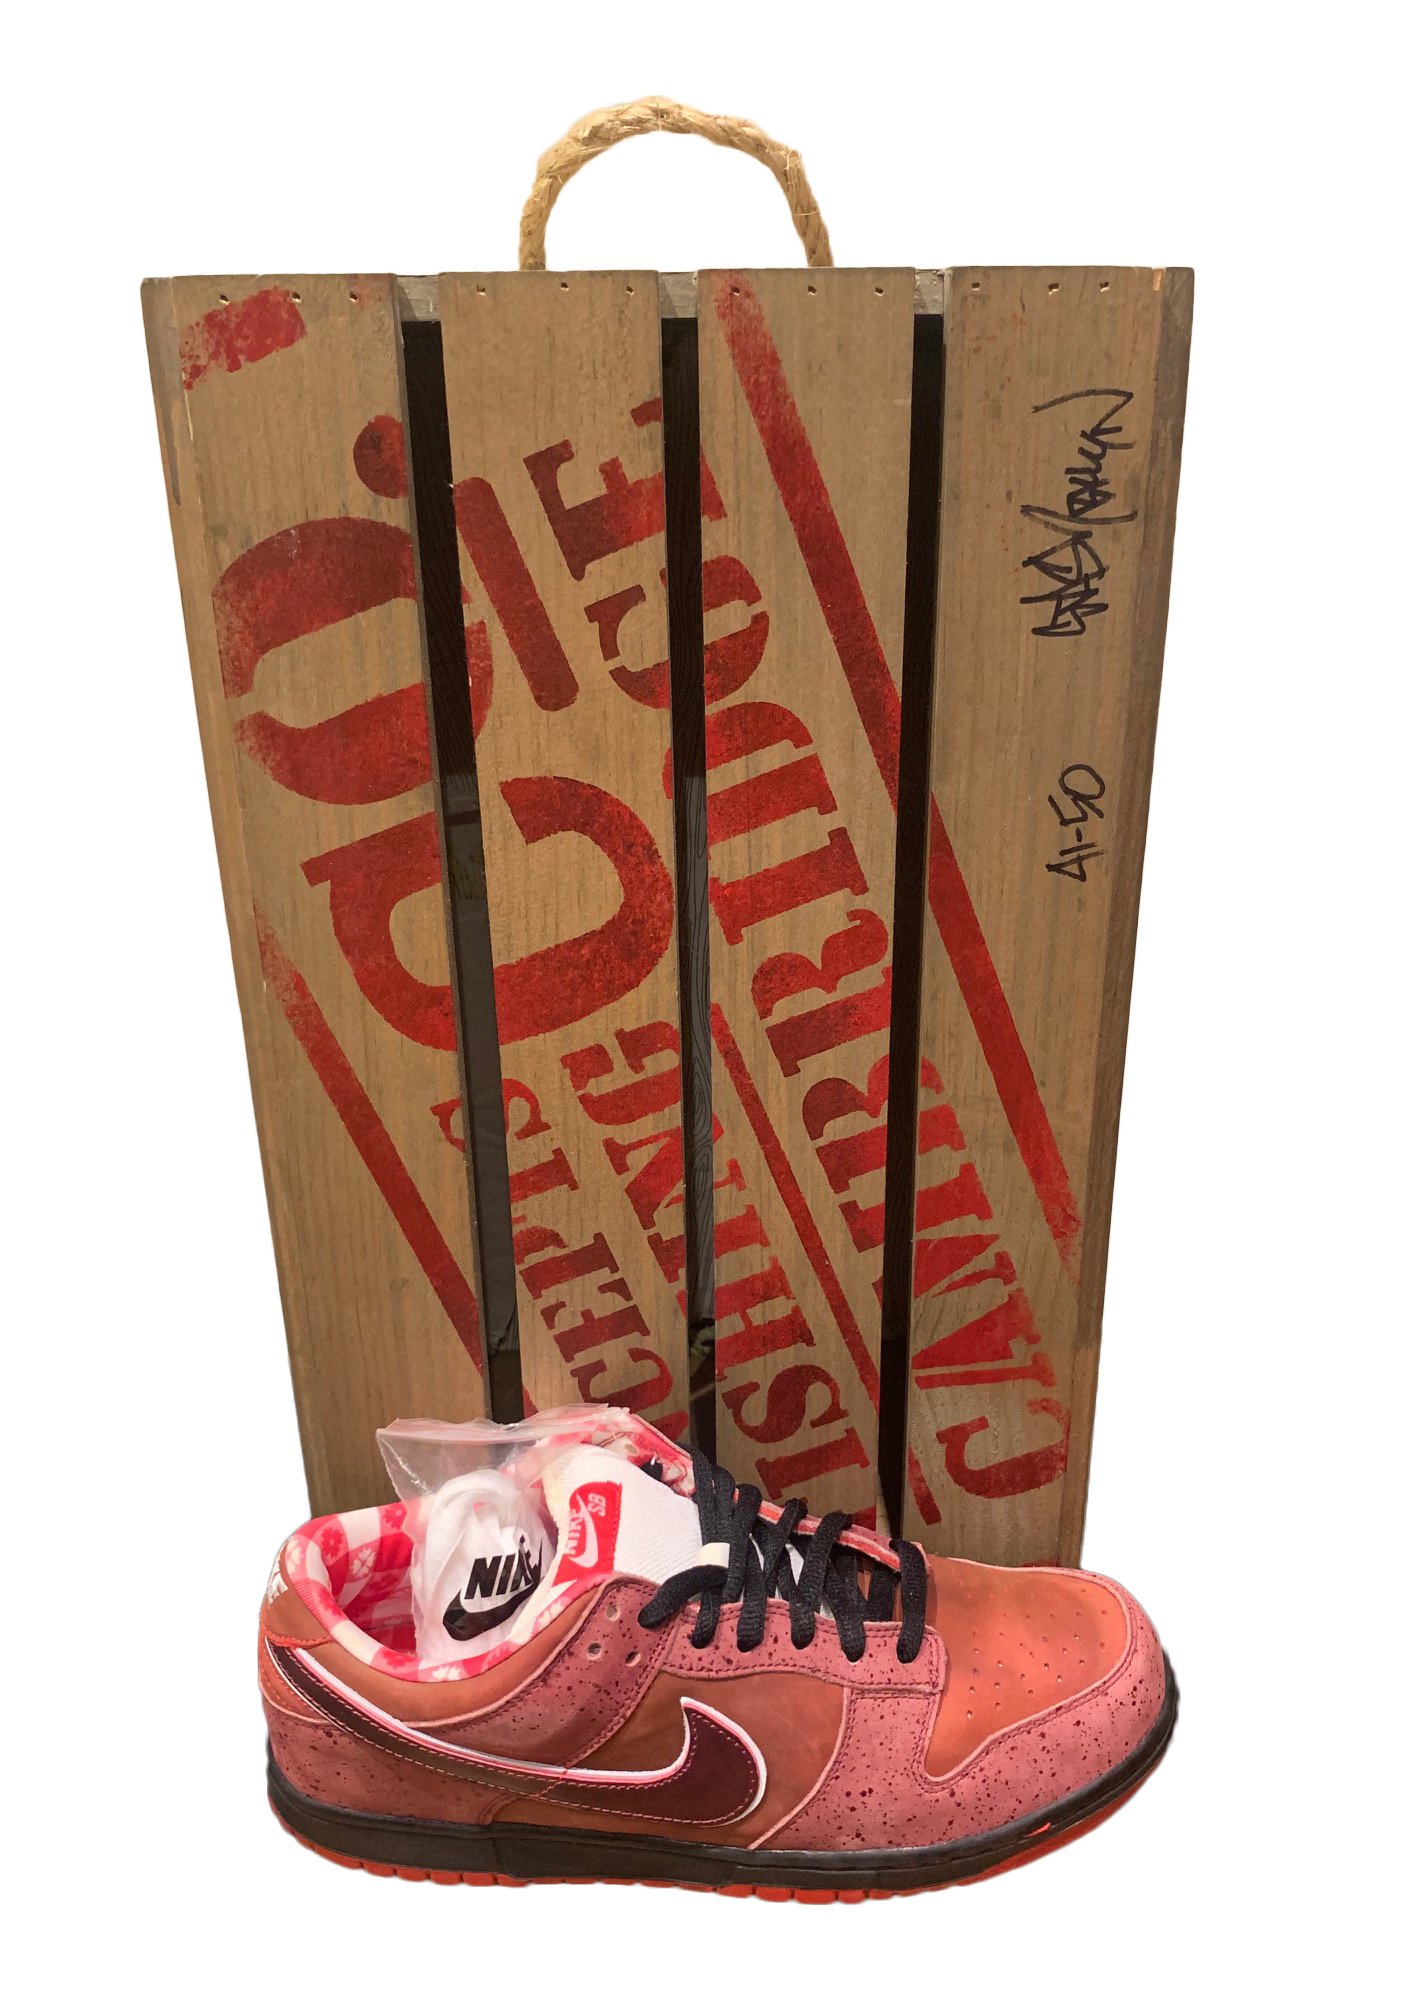 Nike SB Dunk Low Concepts Red Lobster (Special Box) sneaker informations